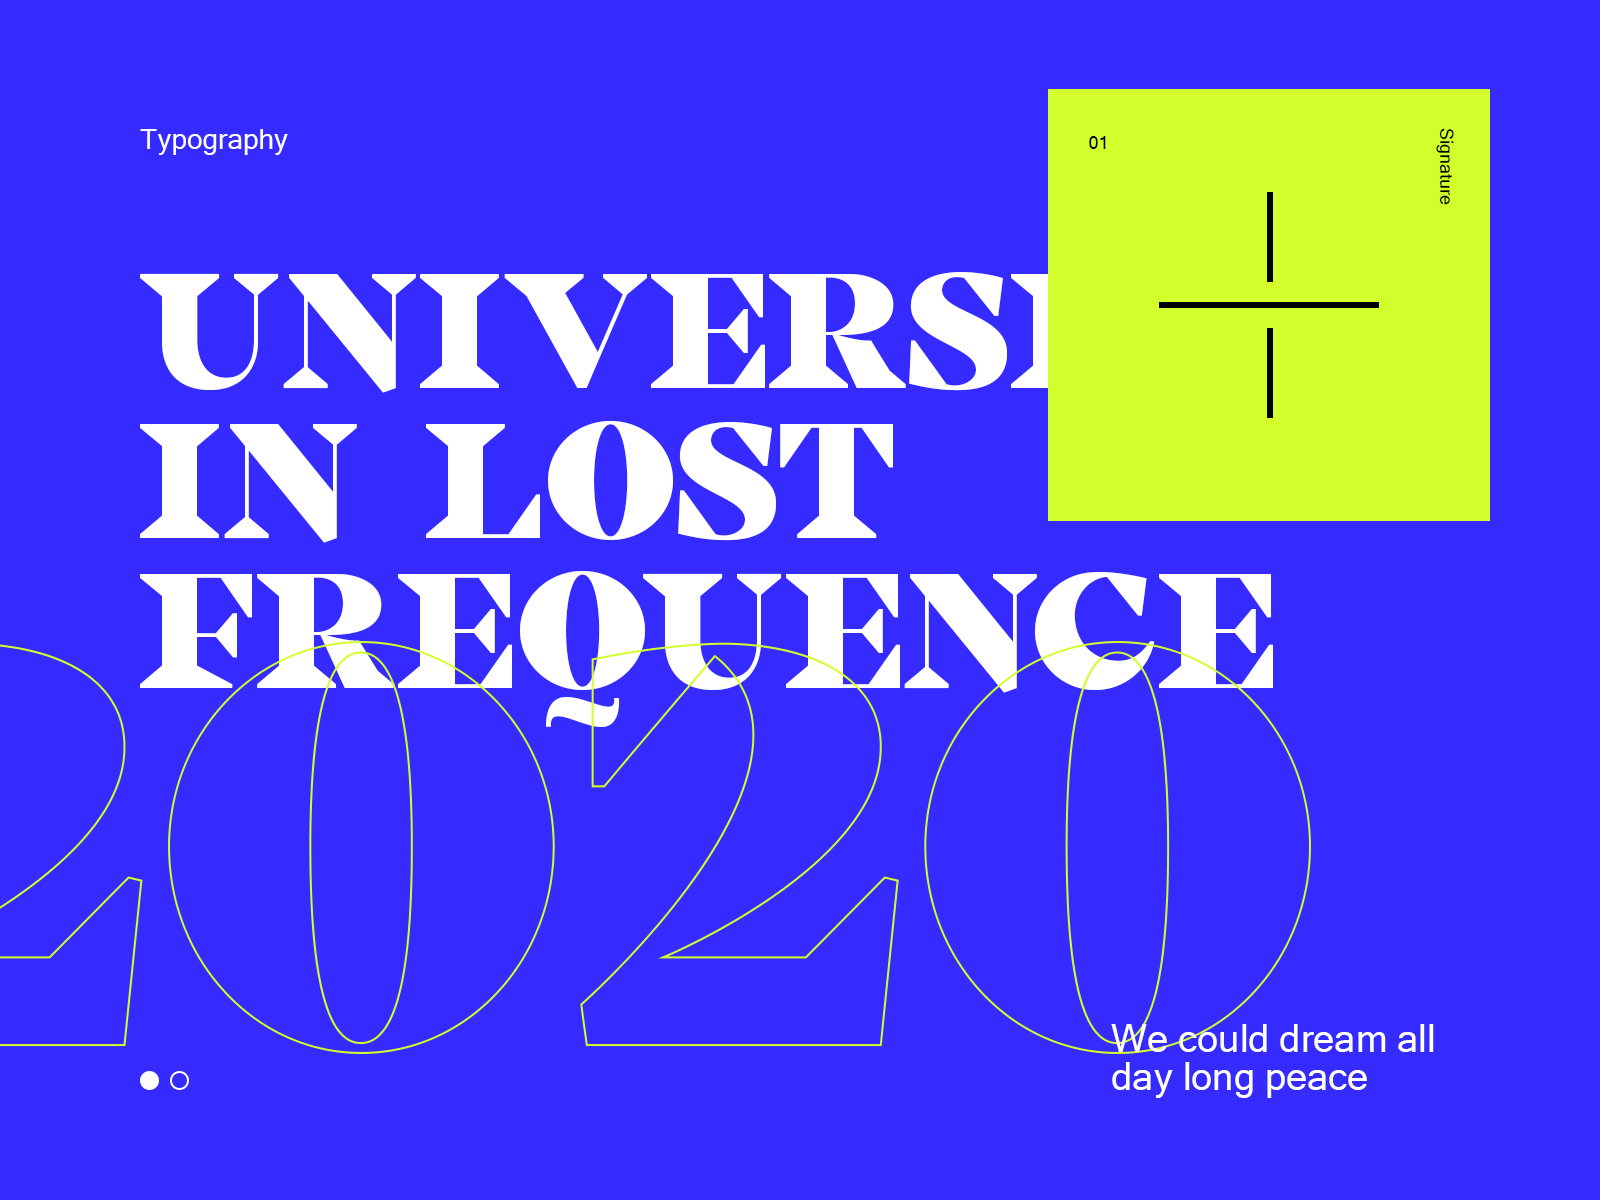 Universe in Lost Frequence class color course editorial exploration interface online typographic typography ui universe